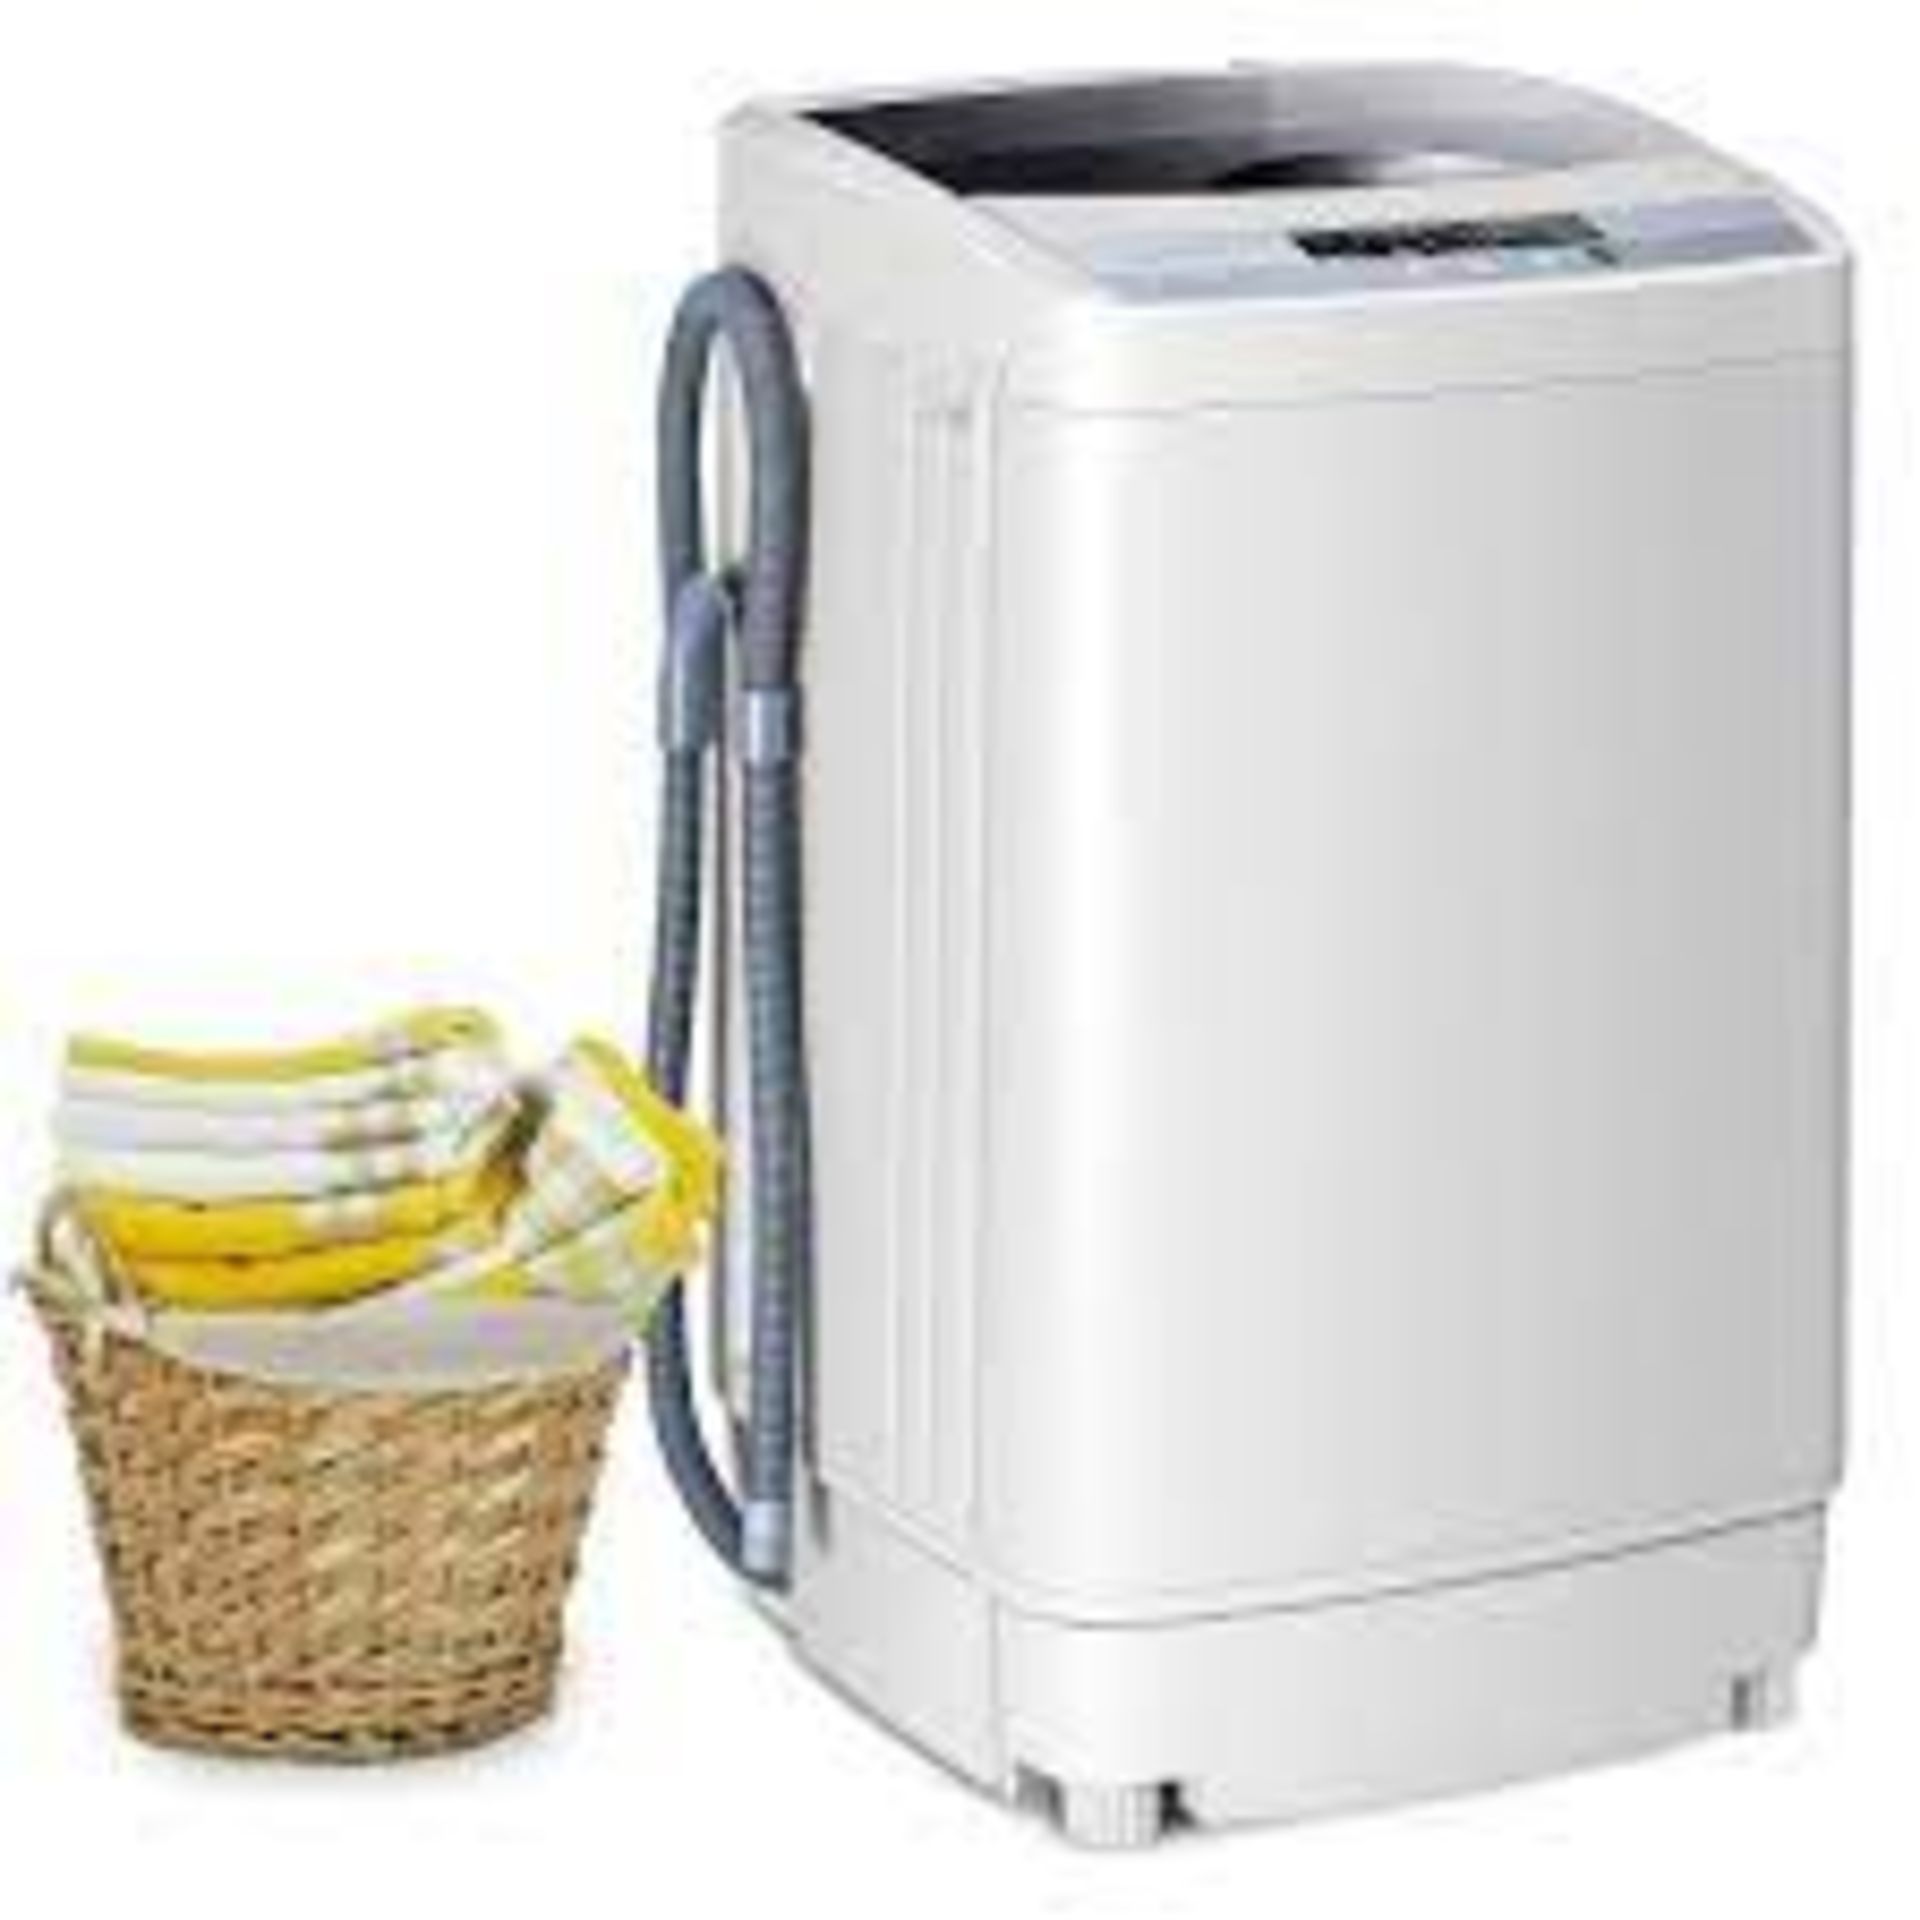 2 in 1 Portable Compact Full-Automatic Washing Machine Washer/Spinner - ER54